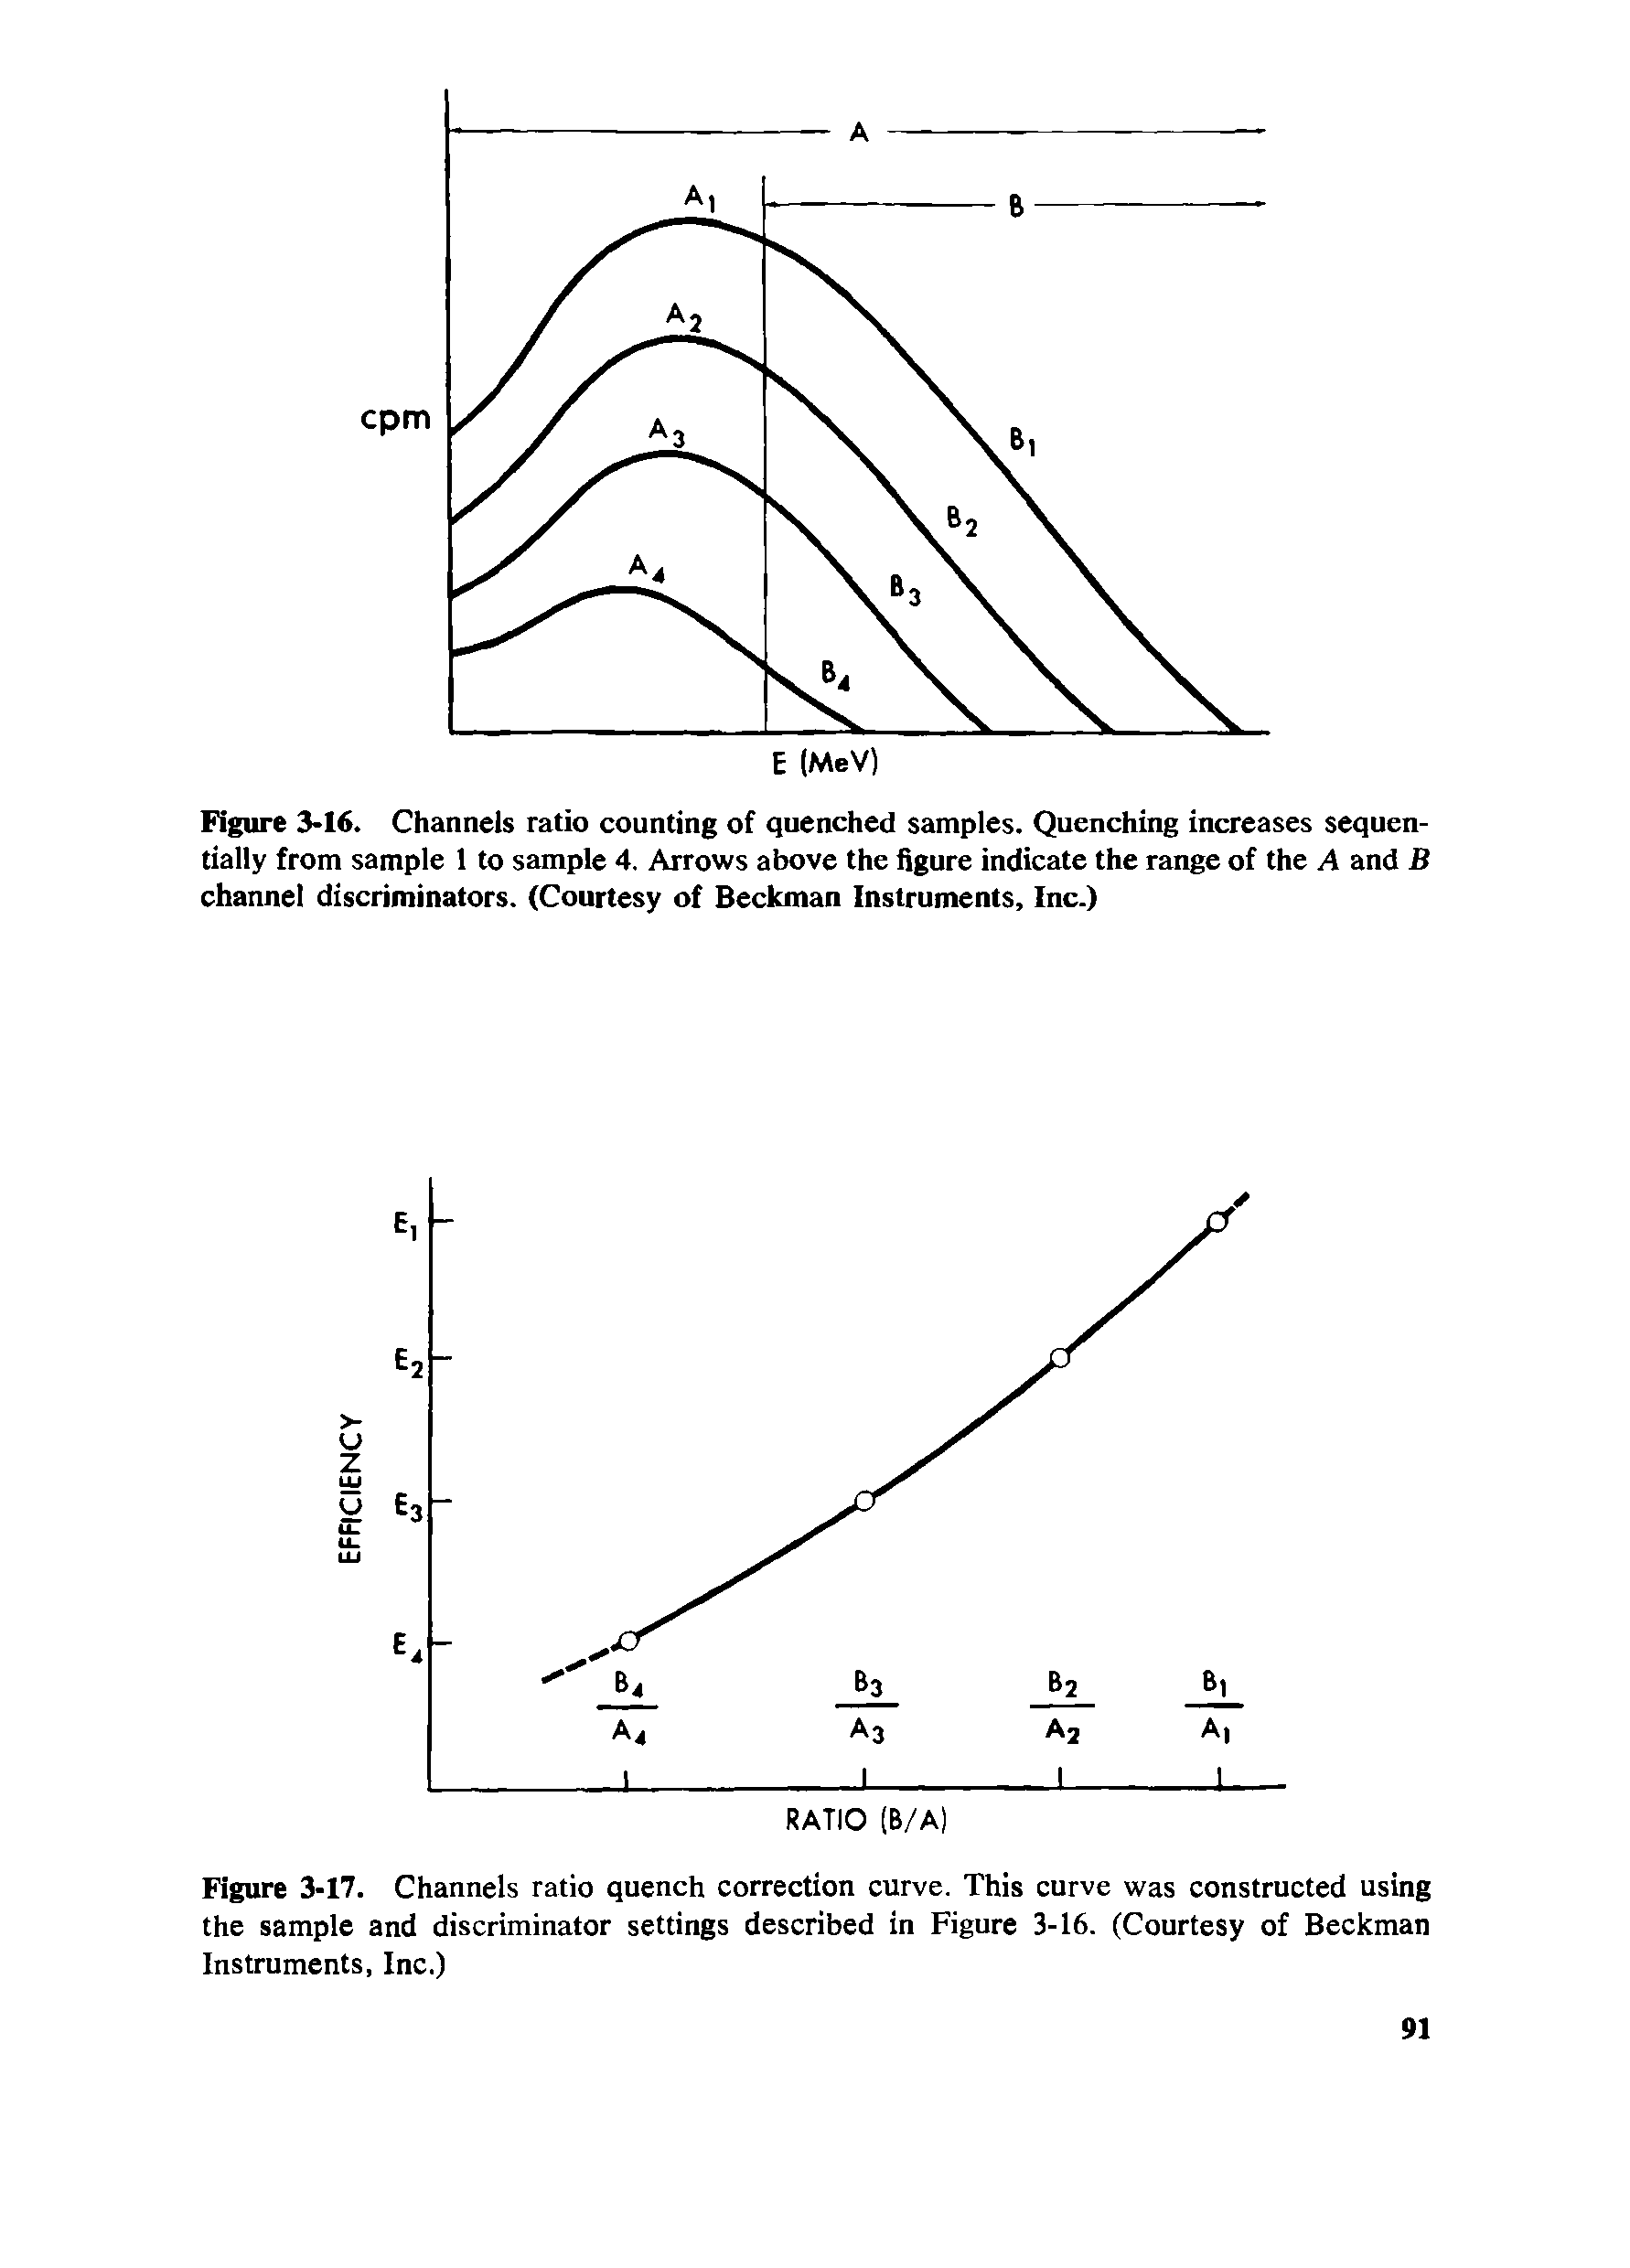 Figure 3-17. Channels ratio quench correction curve. This curve was constructed using the sample and discriminator settings described in Figure 3-16. (Courtesy of Beckman Instruments, Inc.)...